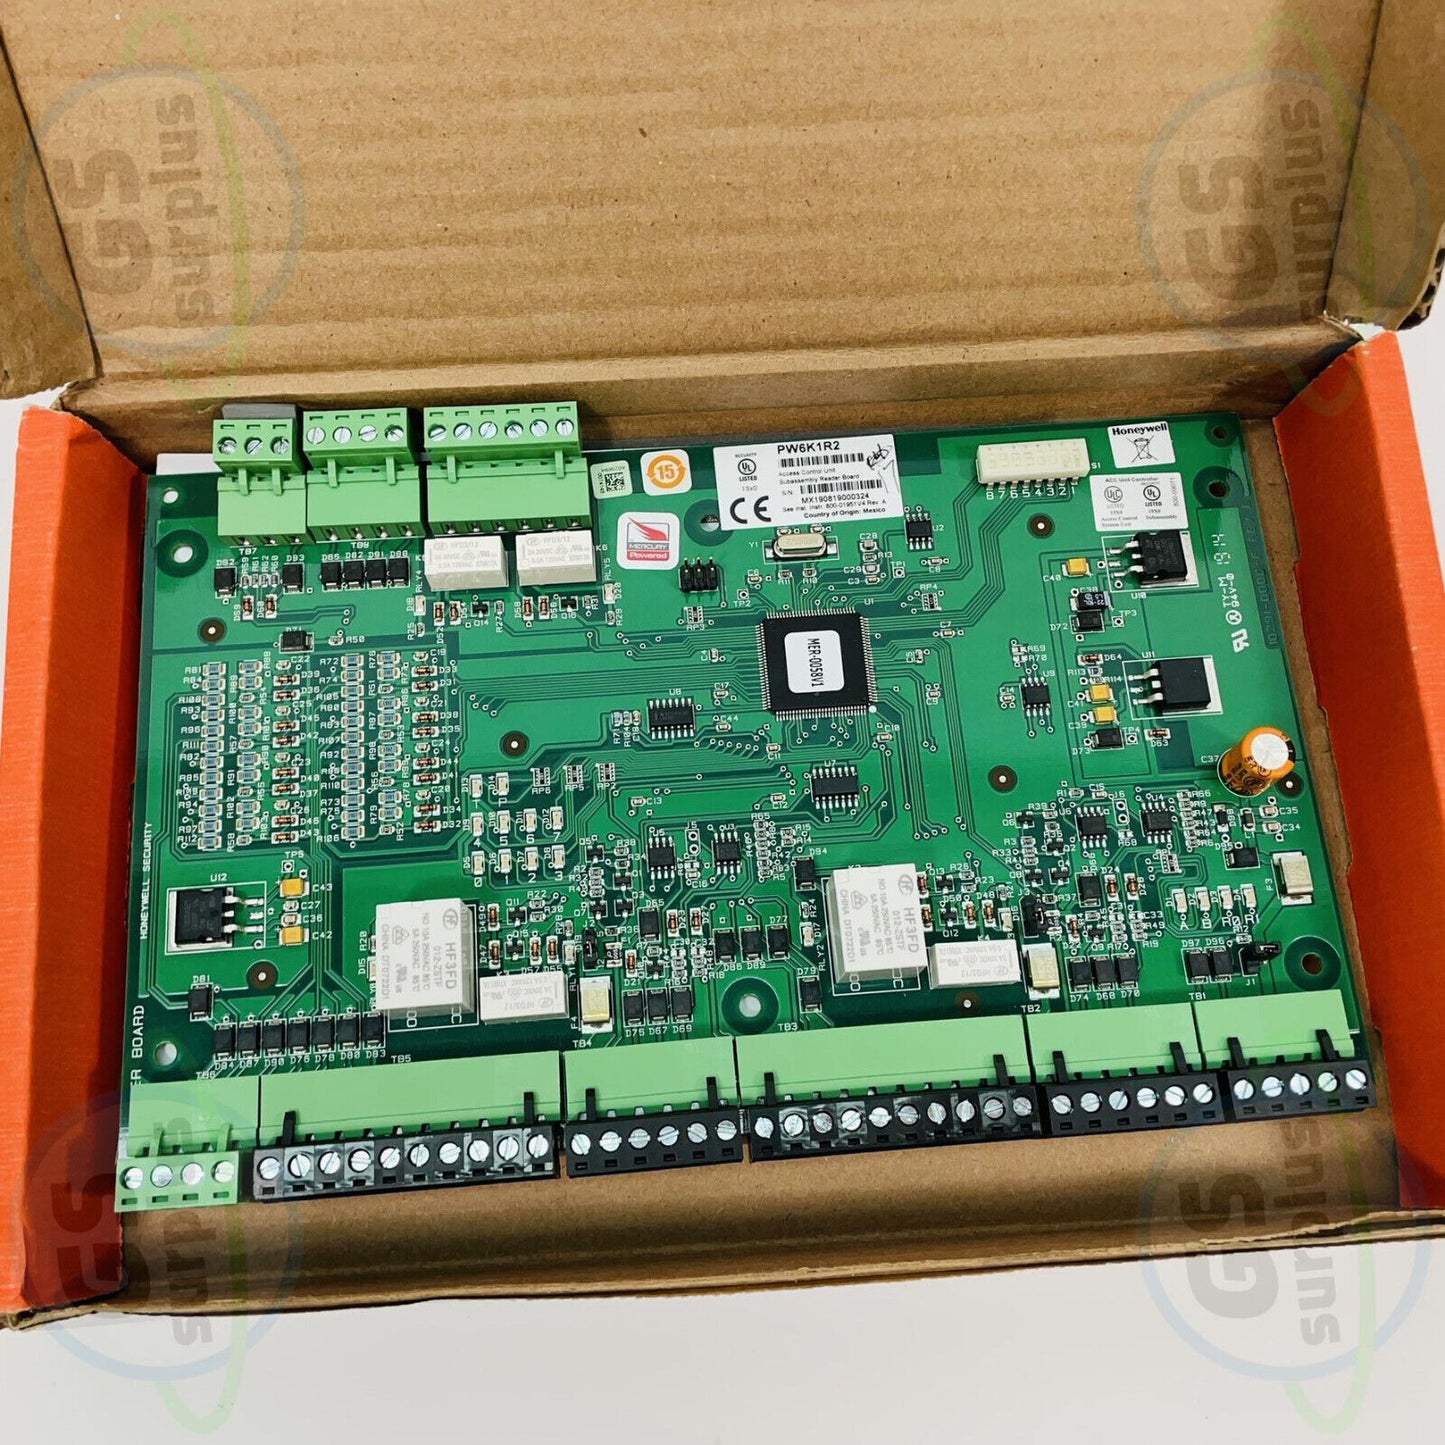 Honeywell PW6K1R2 Access Controller Access Control Motherboard, New open box